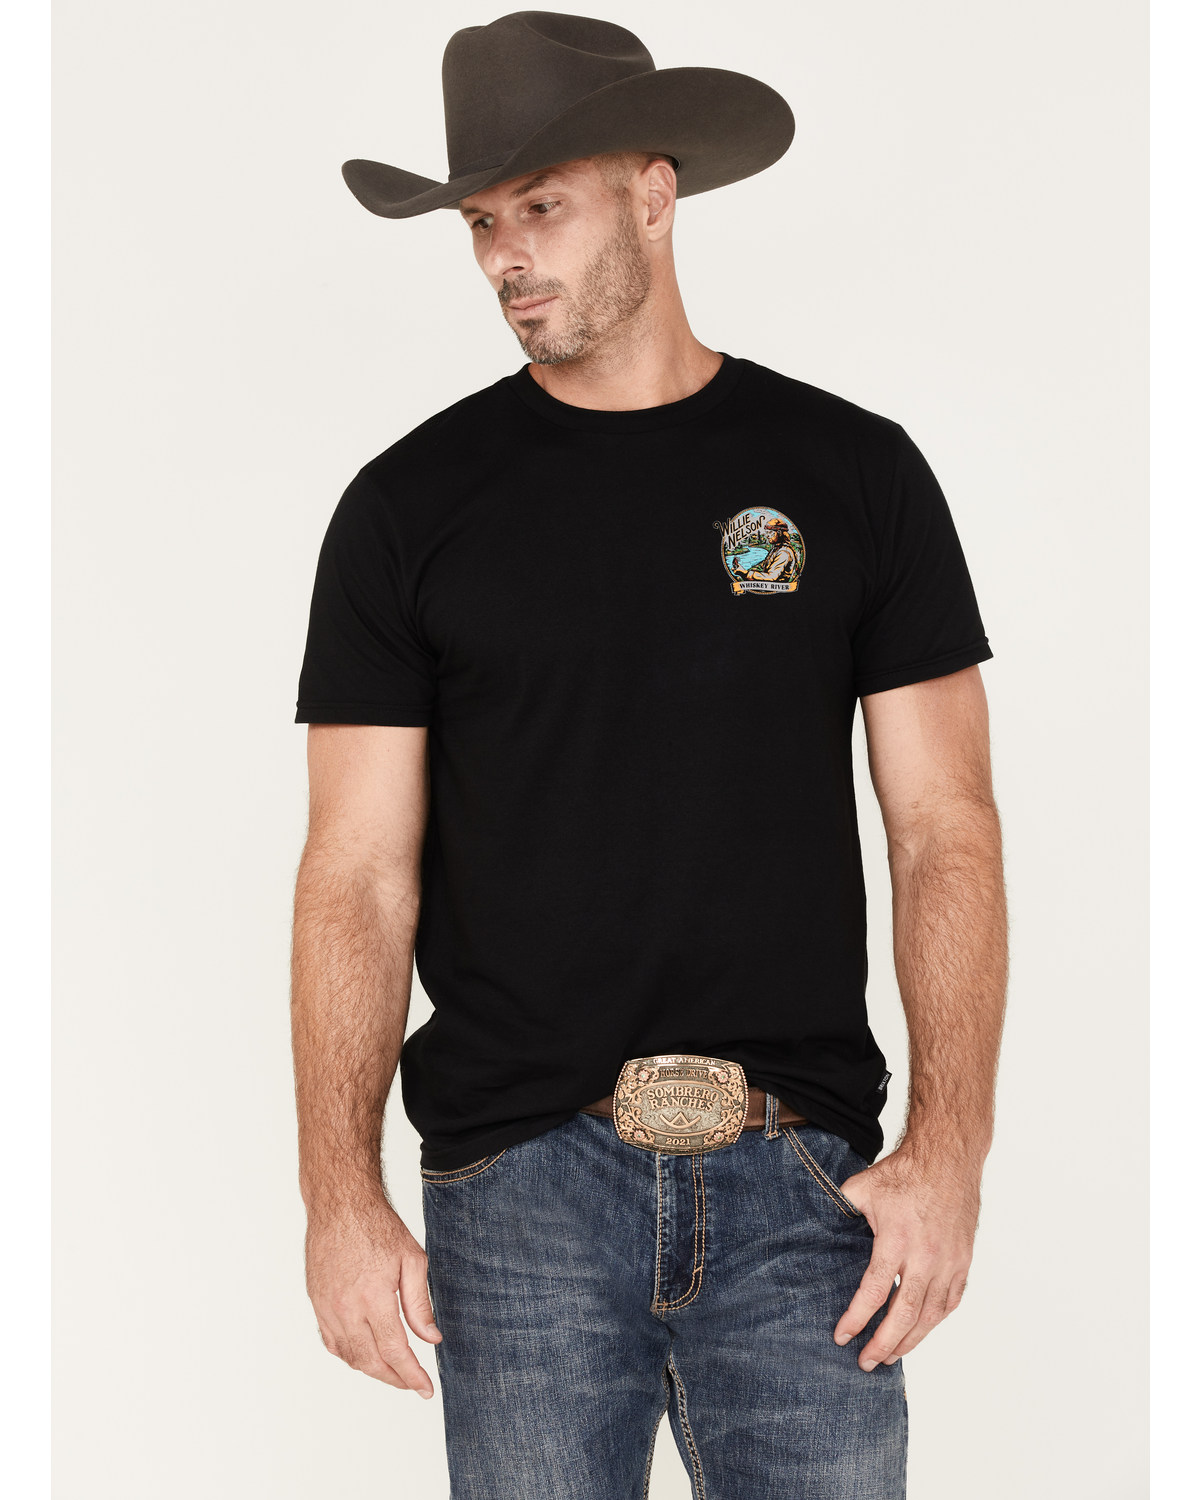 Brixton x Willie Nelson Men's Whiskey River Graphic T-Shirt